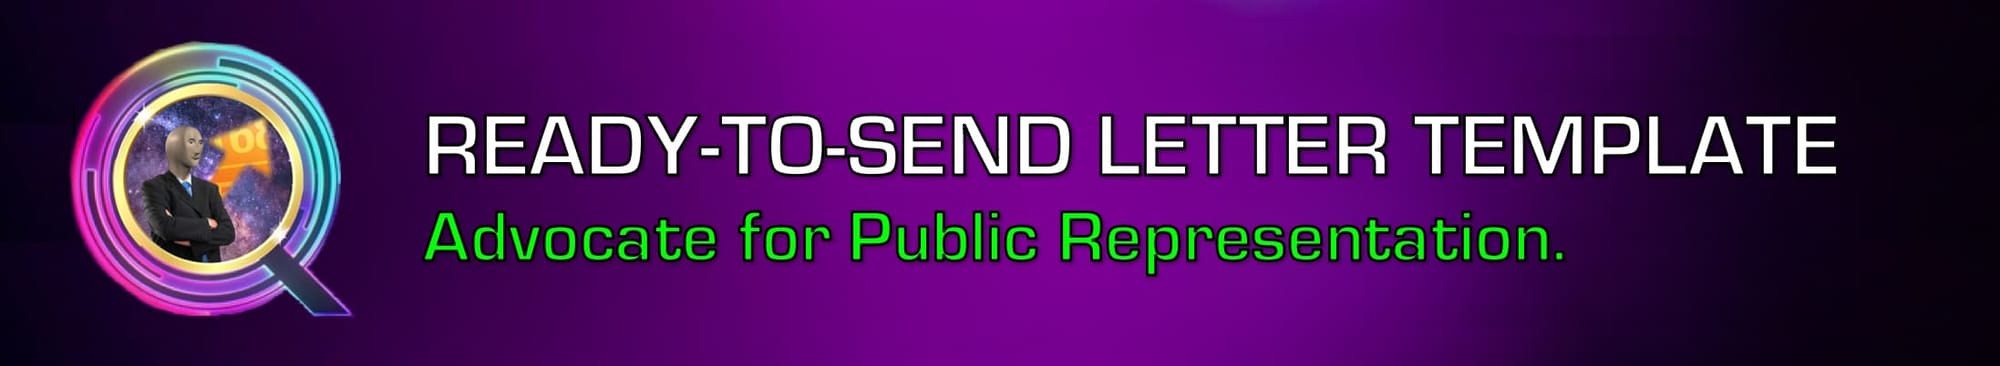 HEADER: READY-TO-SEND LETTER TEMPLATE